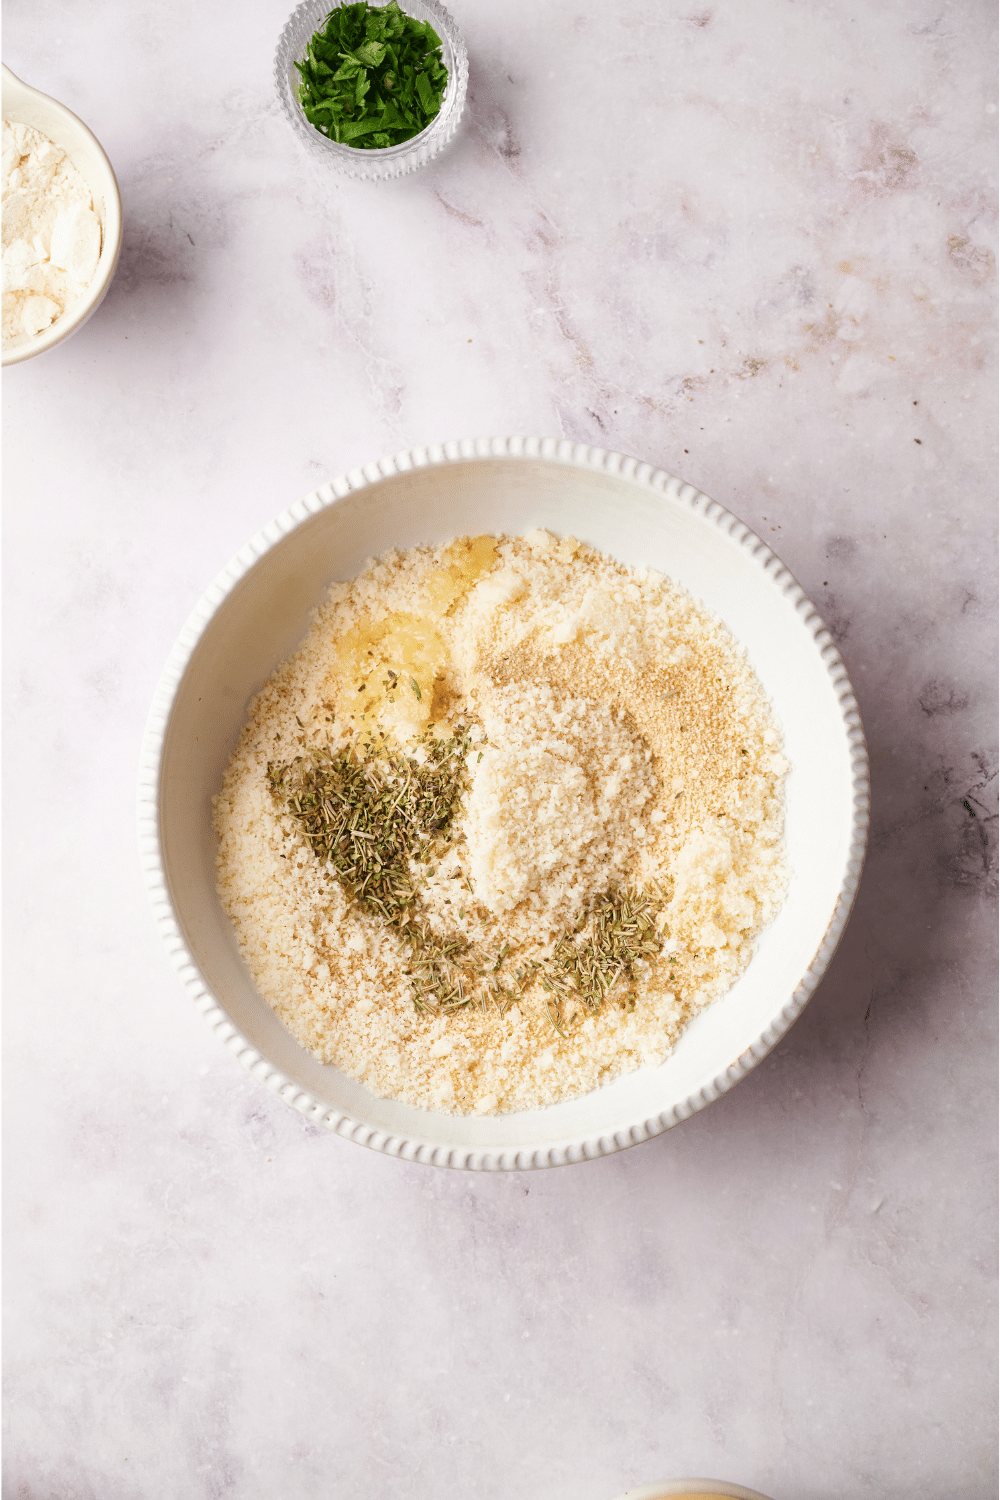 A bowl filled with grated parmesan cheese, herbs, and breadcrumbs.